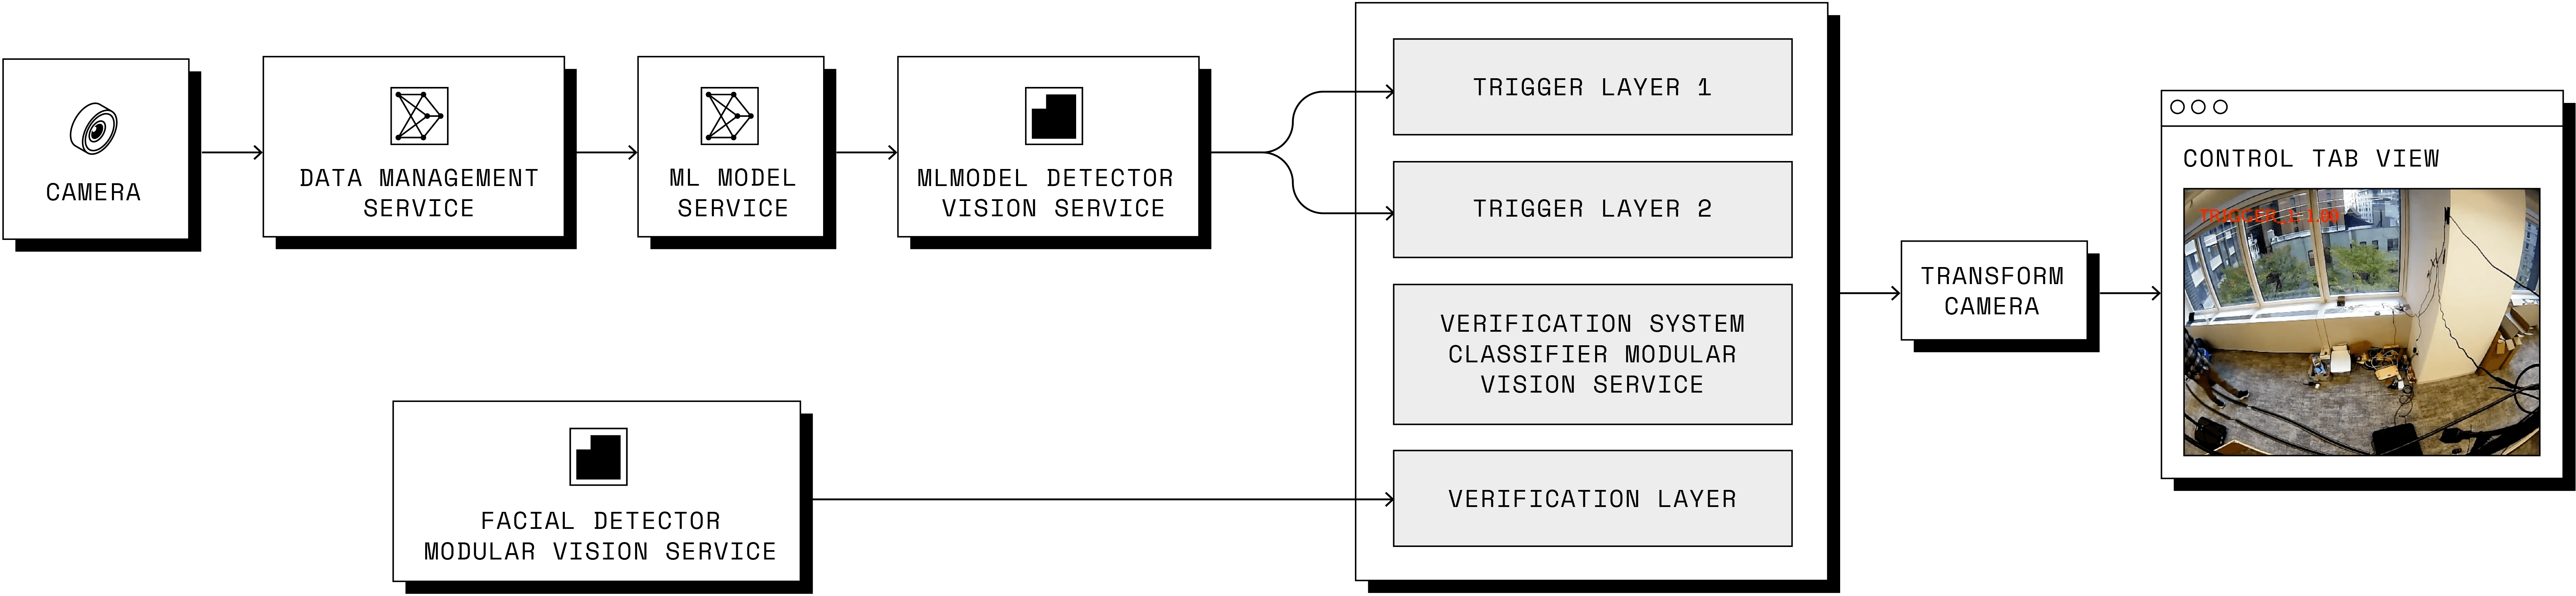 Diagram of the components and services used in the verification system.